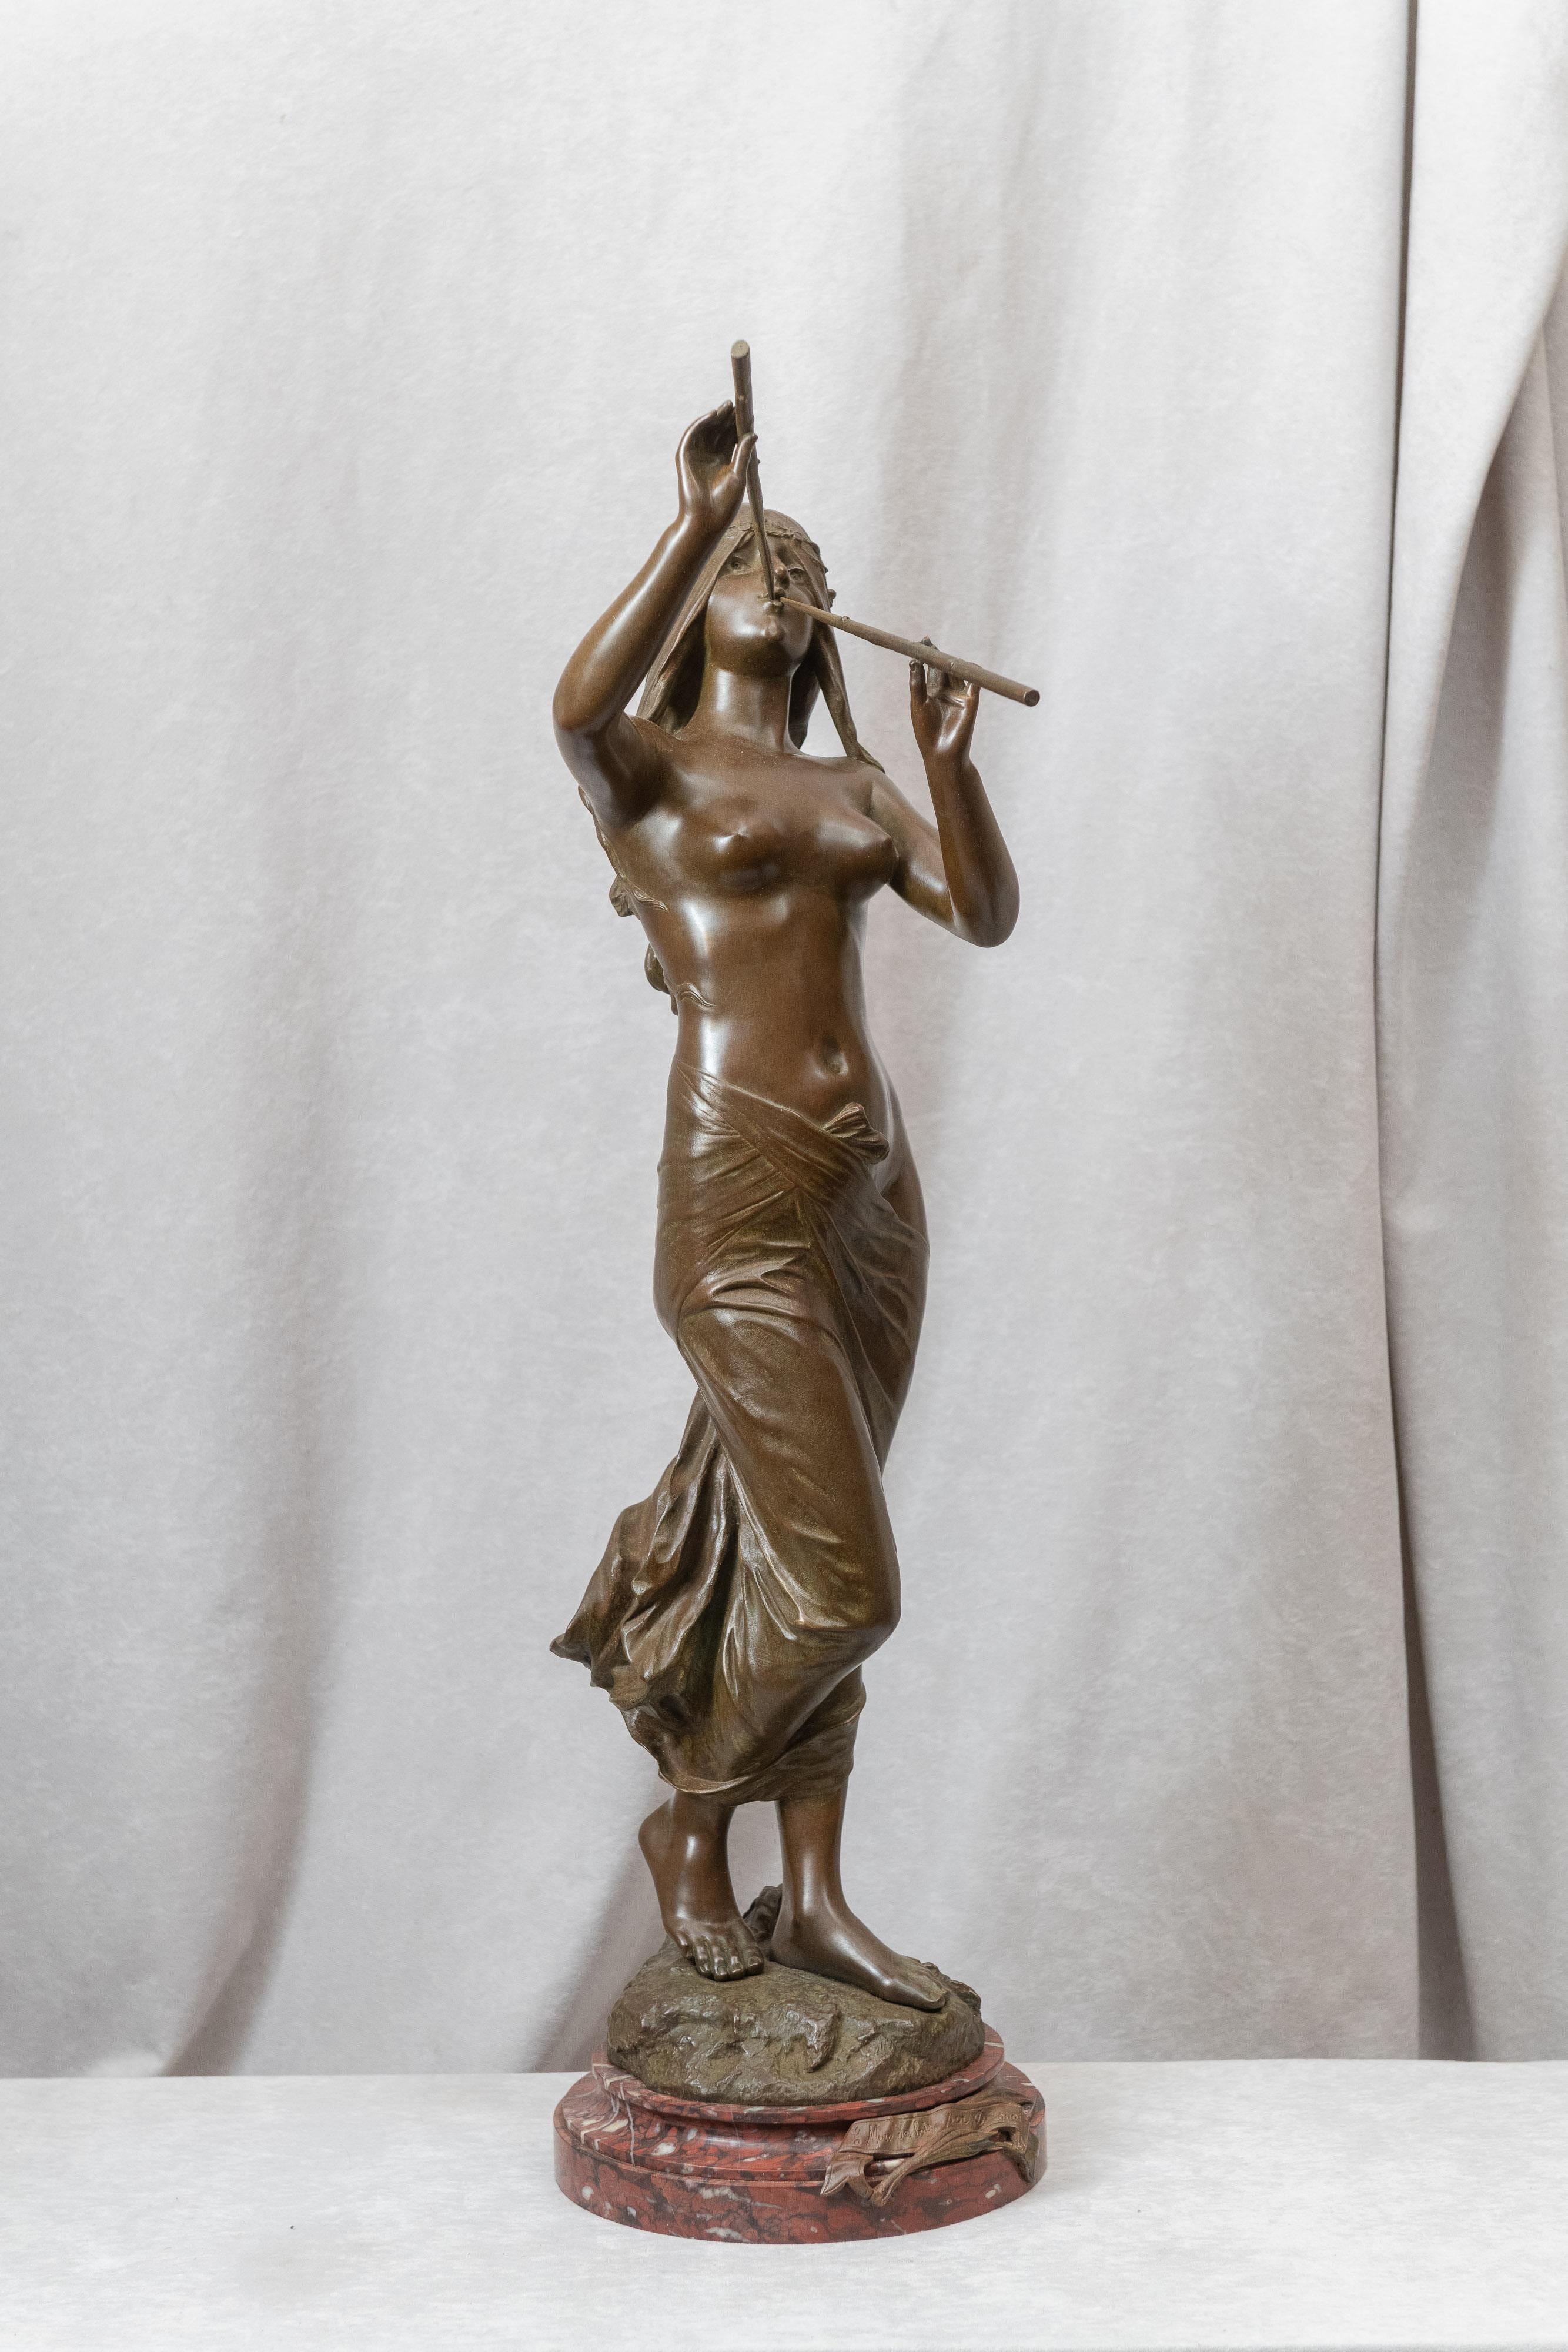 Hand-Crafted Large French Art Nouveau Bronze of a Partially Nude Maiden, Artist signed Drouot